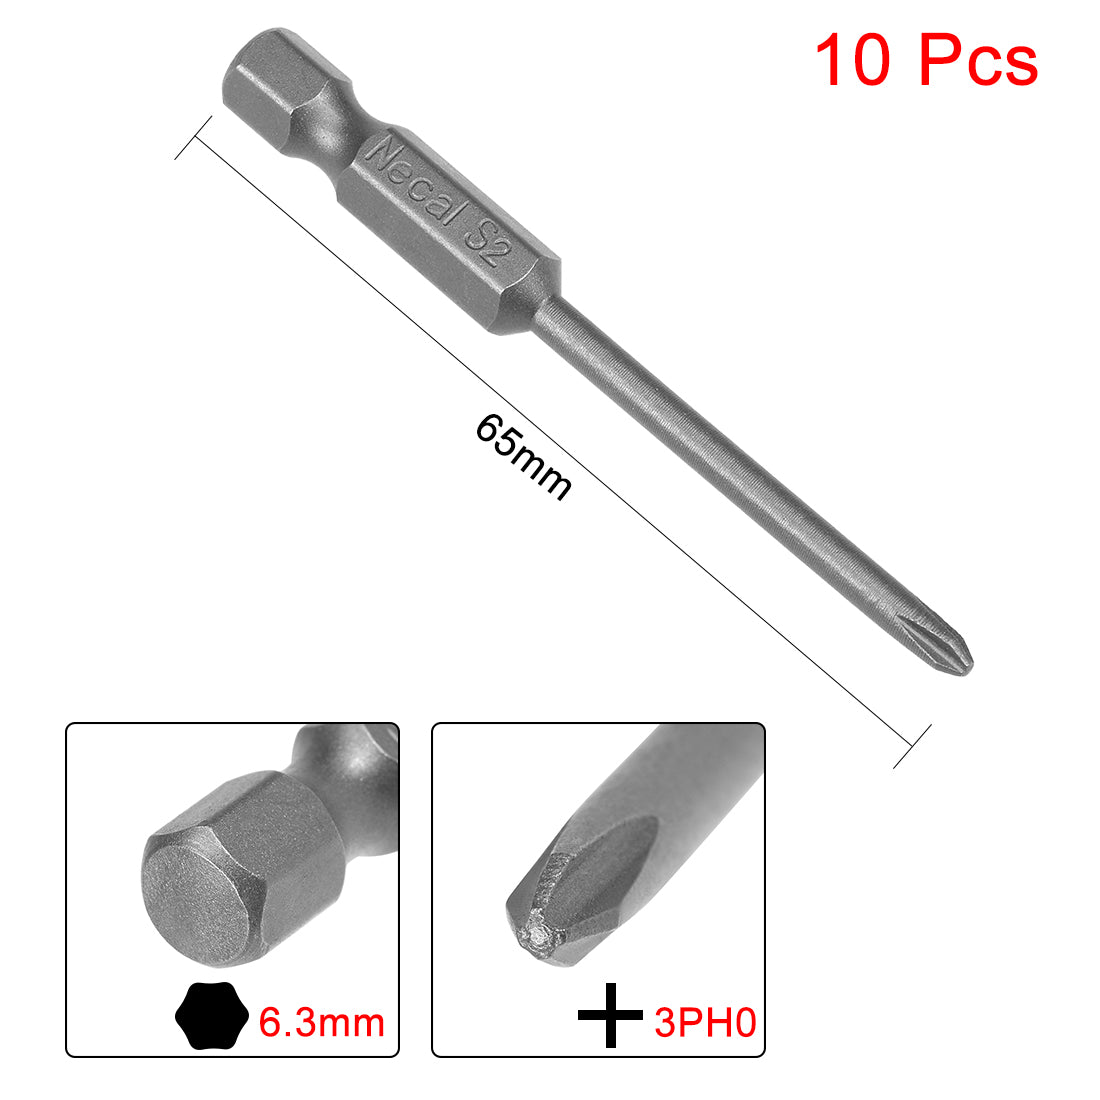 Uxcell Uxcell 3 Pcs 4.5mm PH2 Magnetic Phillips Screwdriver Bits, 1/4 Inch Hex Shank 4.72-inch Length S2 Power Tool